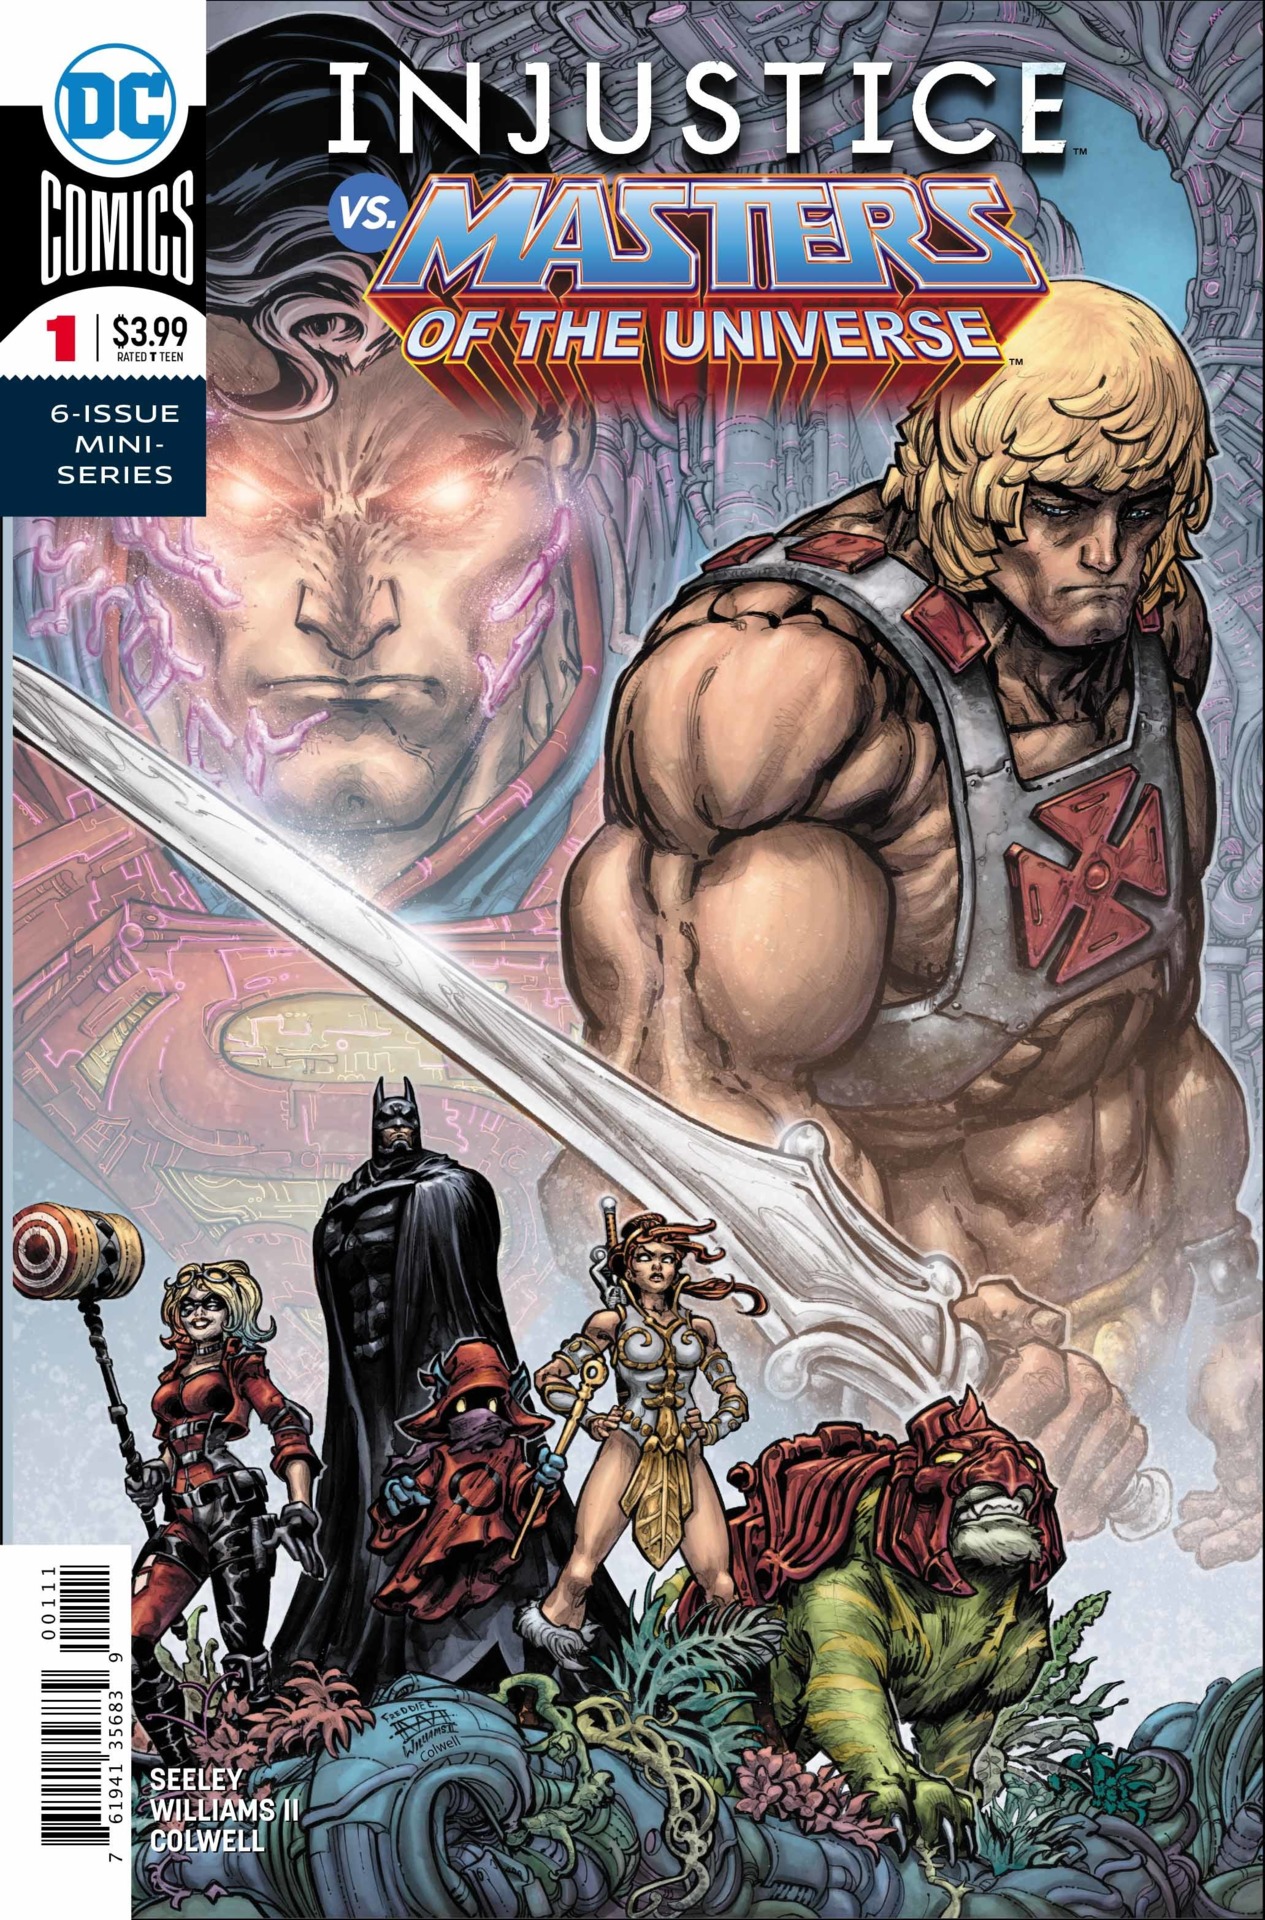 Injustice Vs. Masters Of The Universe Comic Is A Giant Sandbox Of Nostalgia